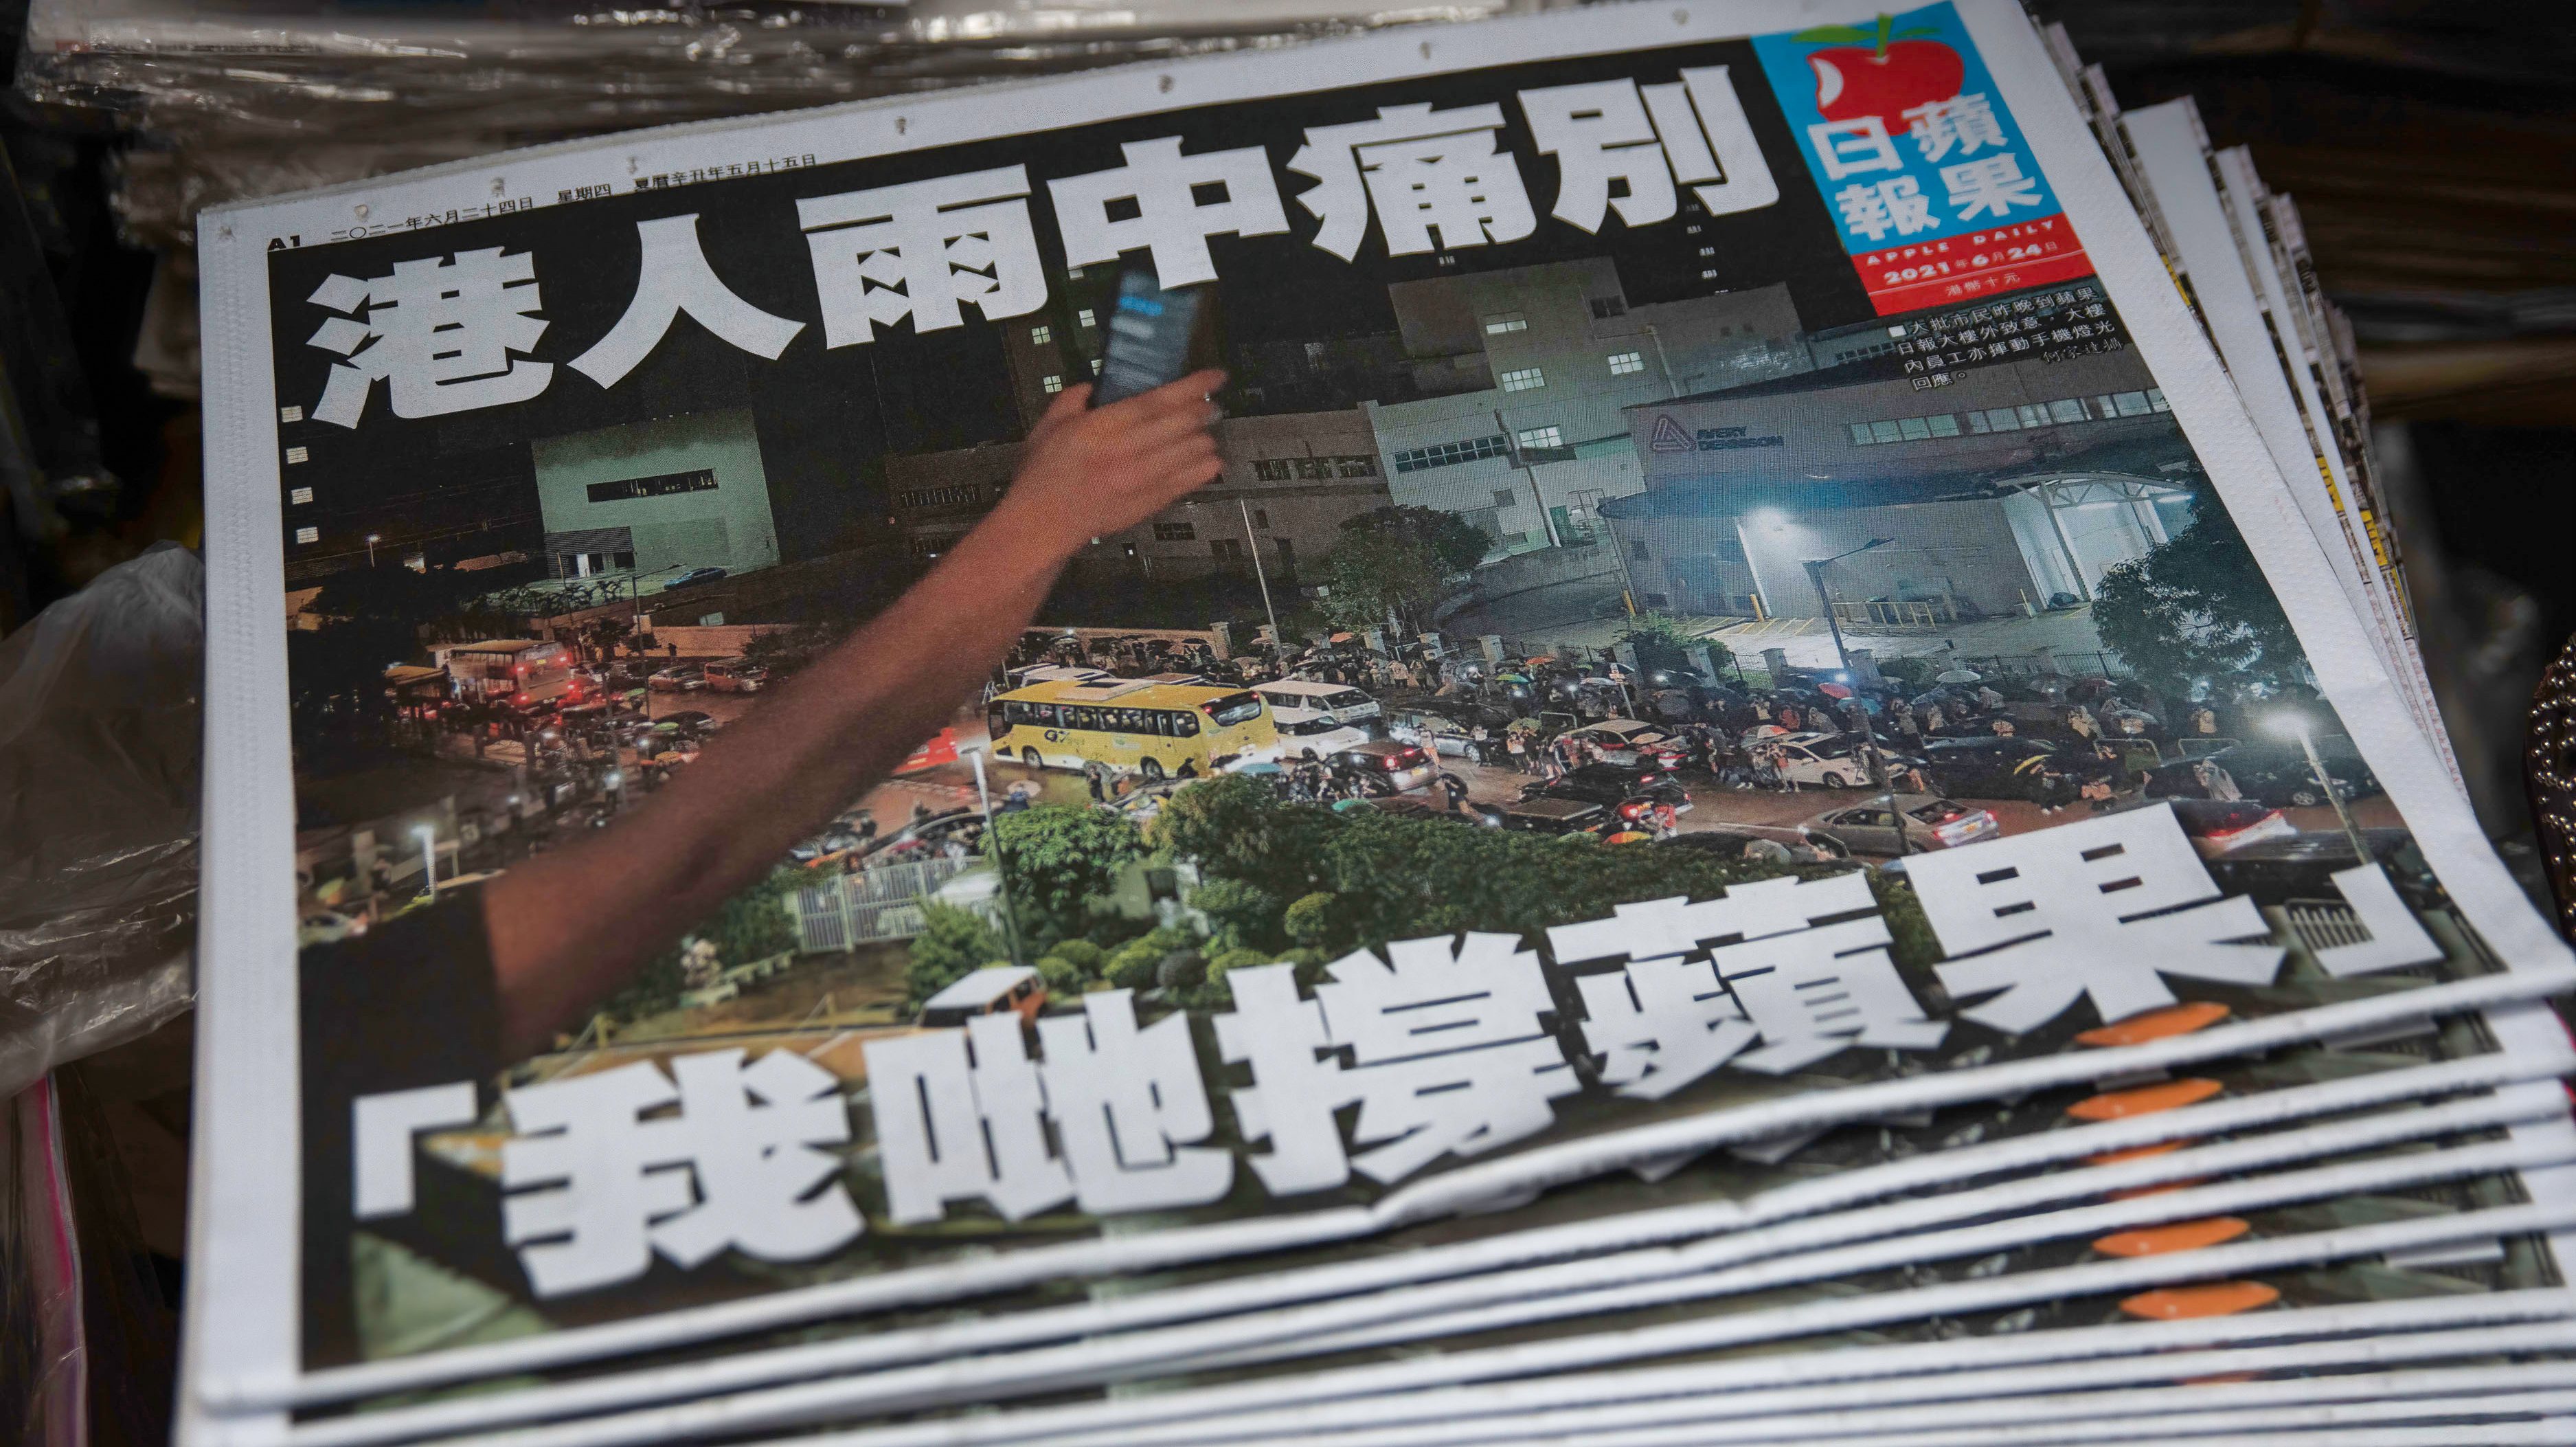 View of the final edition of Apple Daily newspaper at